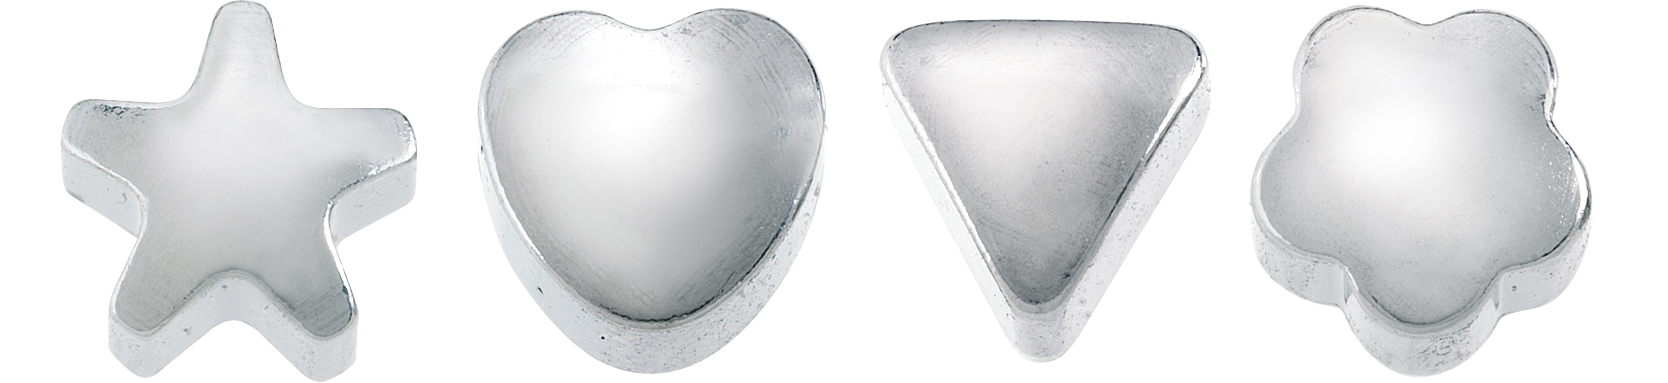 First ear stud Studex plus, 3.95 mm white shapes